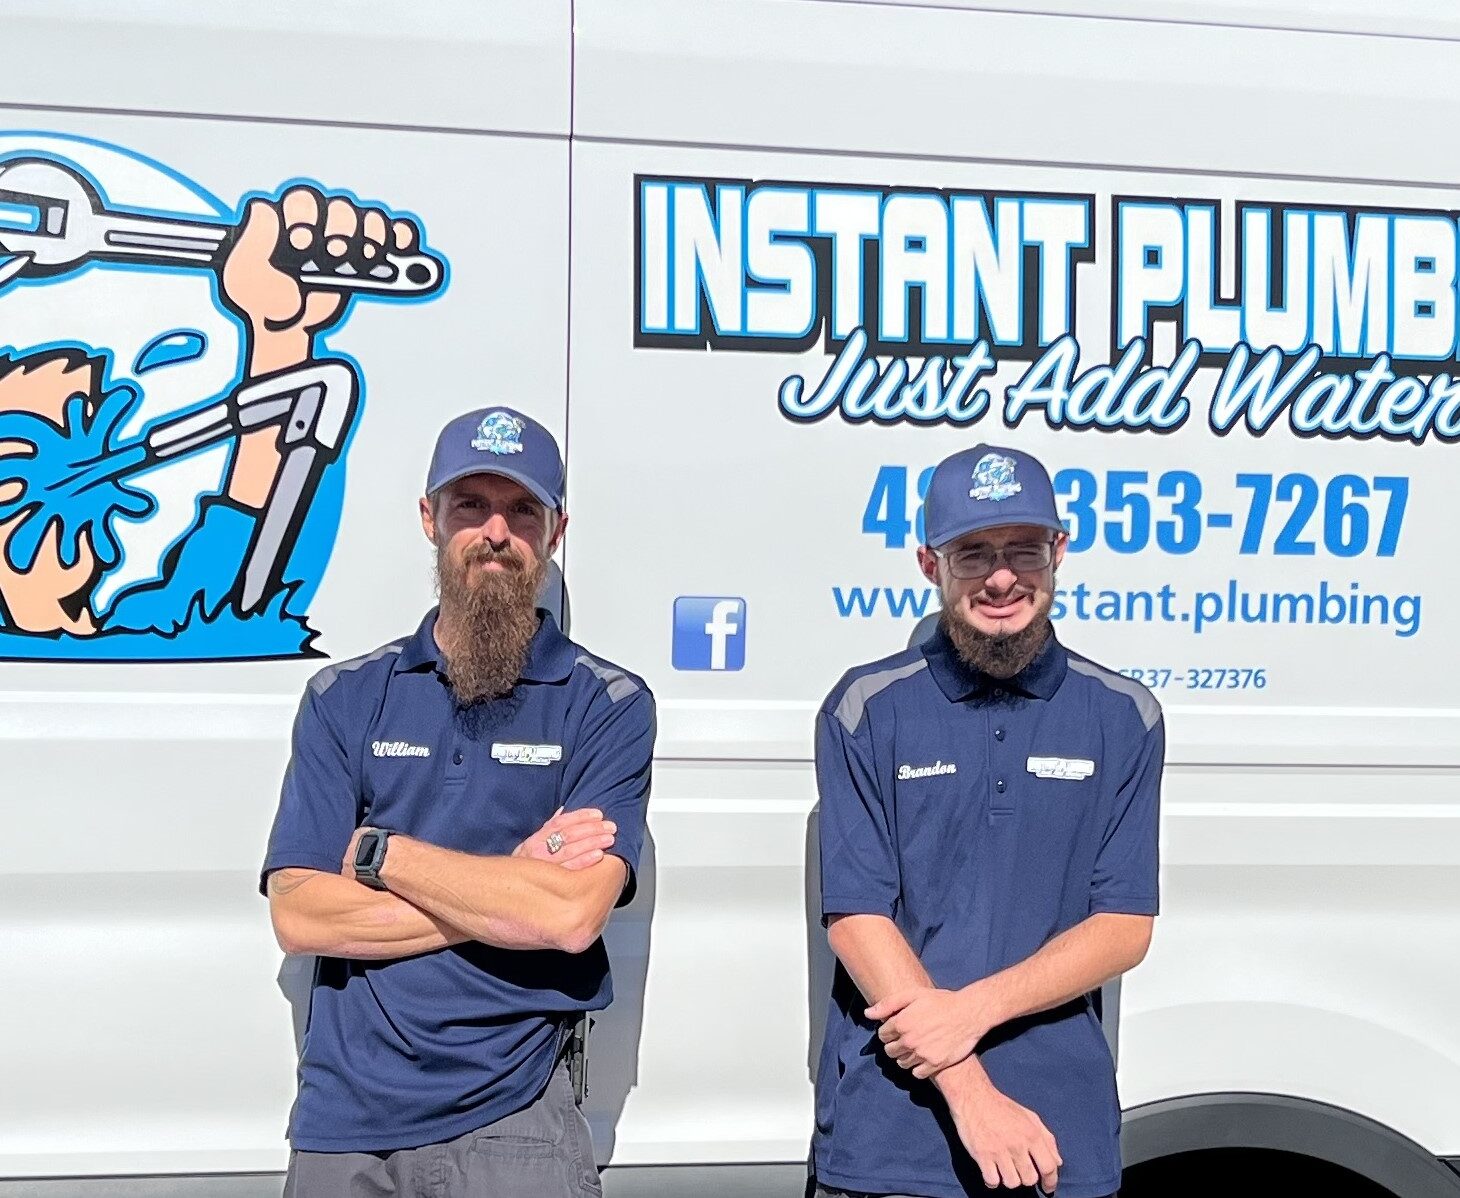 Your Local Plumbing Experts!